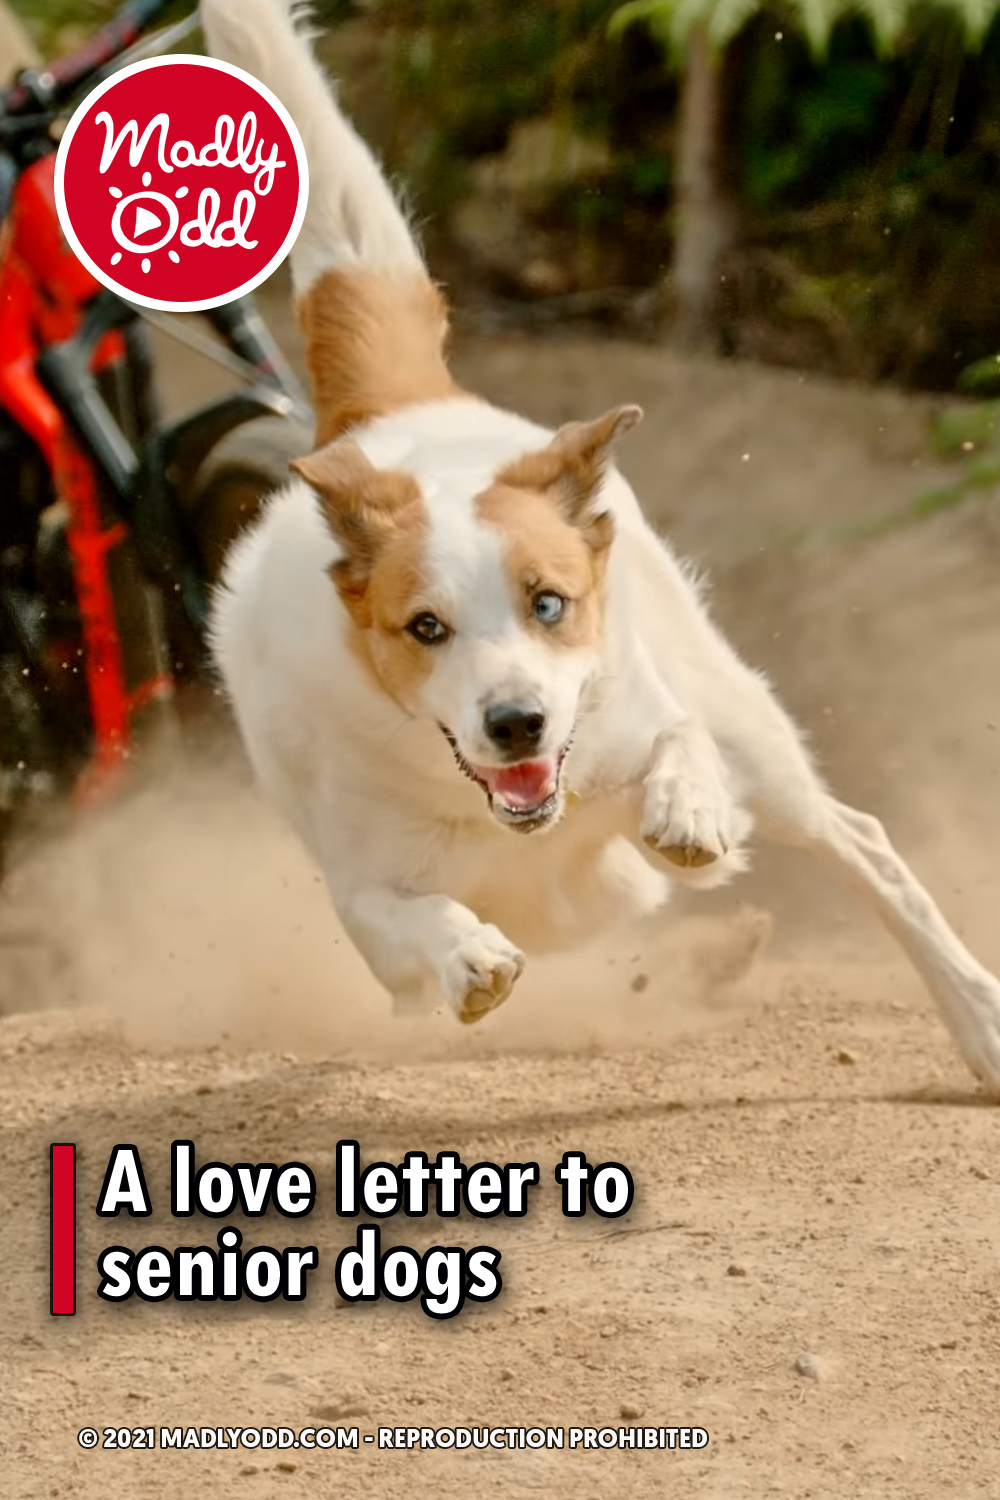 A love letter to senior dogs